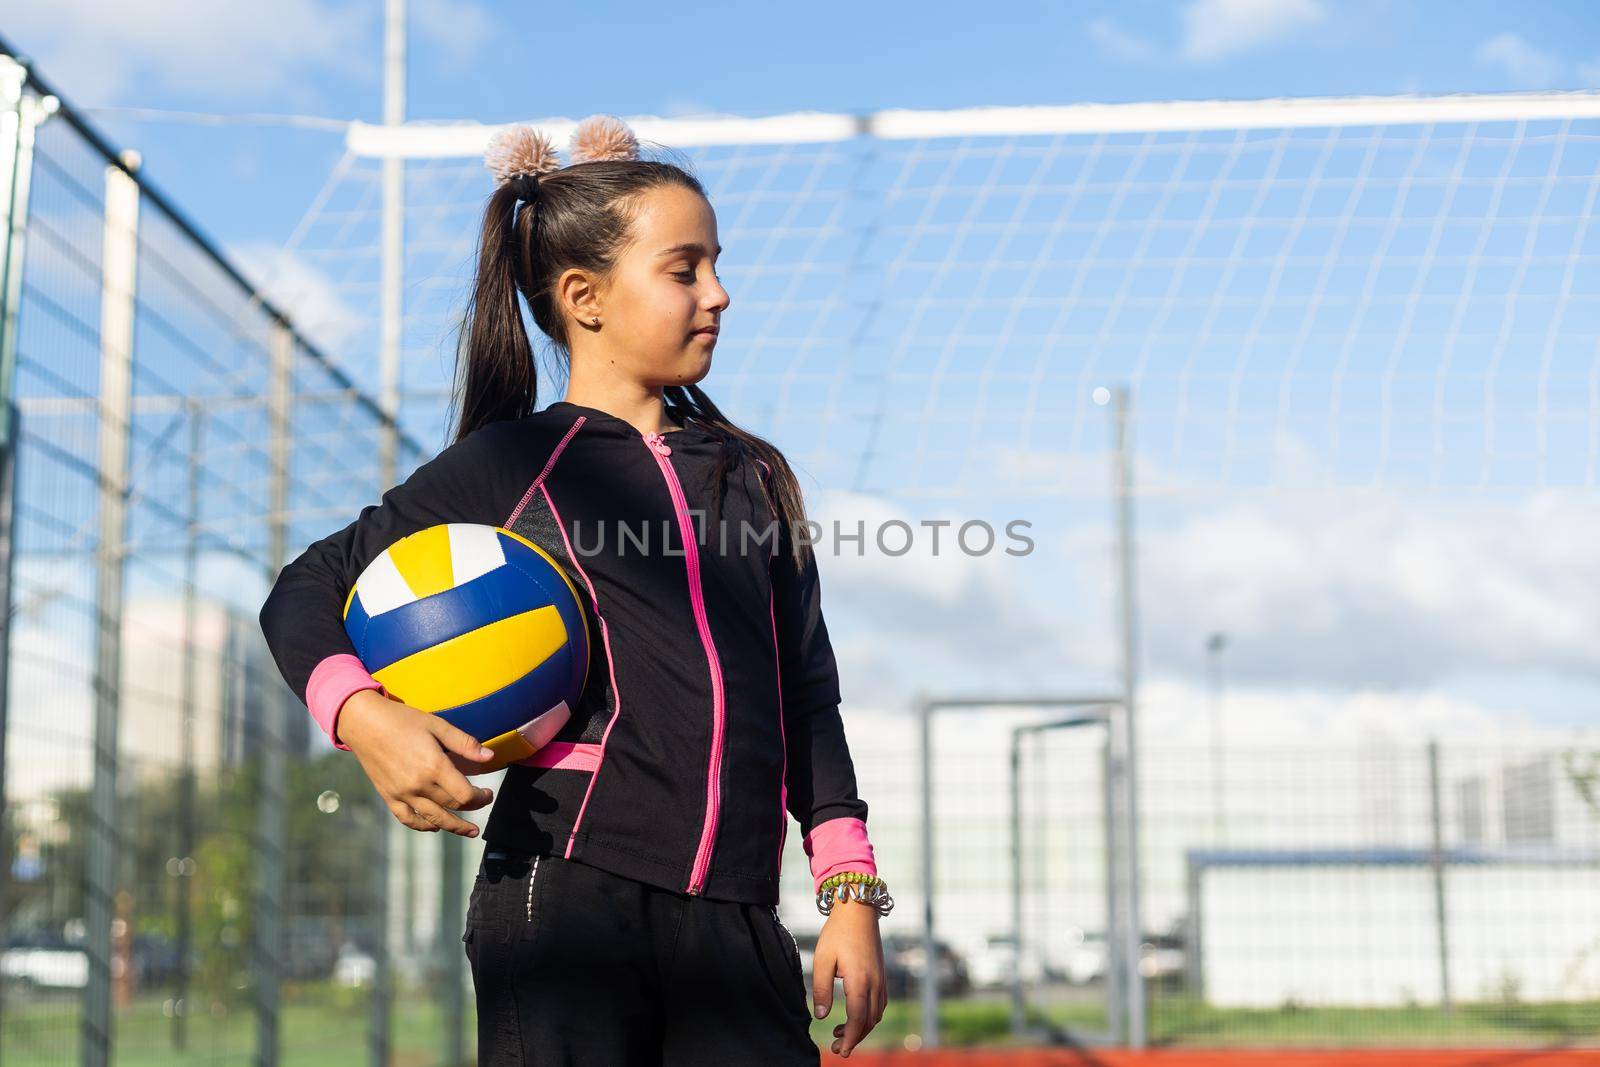 Cute girl playing ball. Girl with a blue-yellow volleyball.